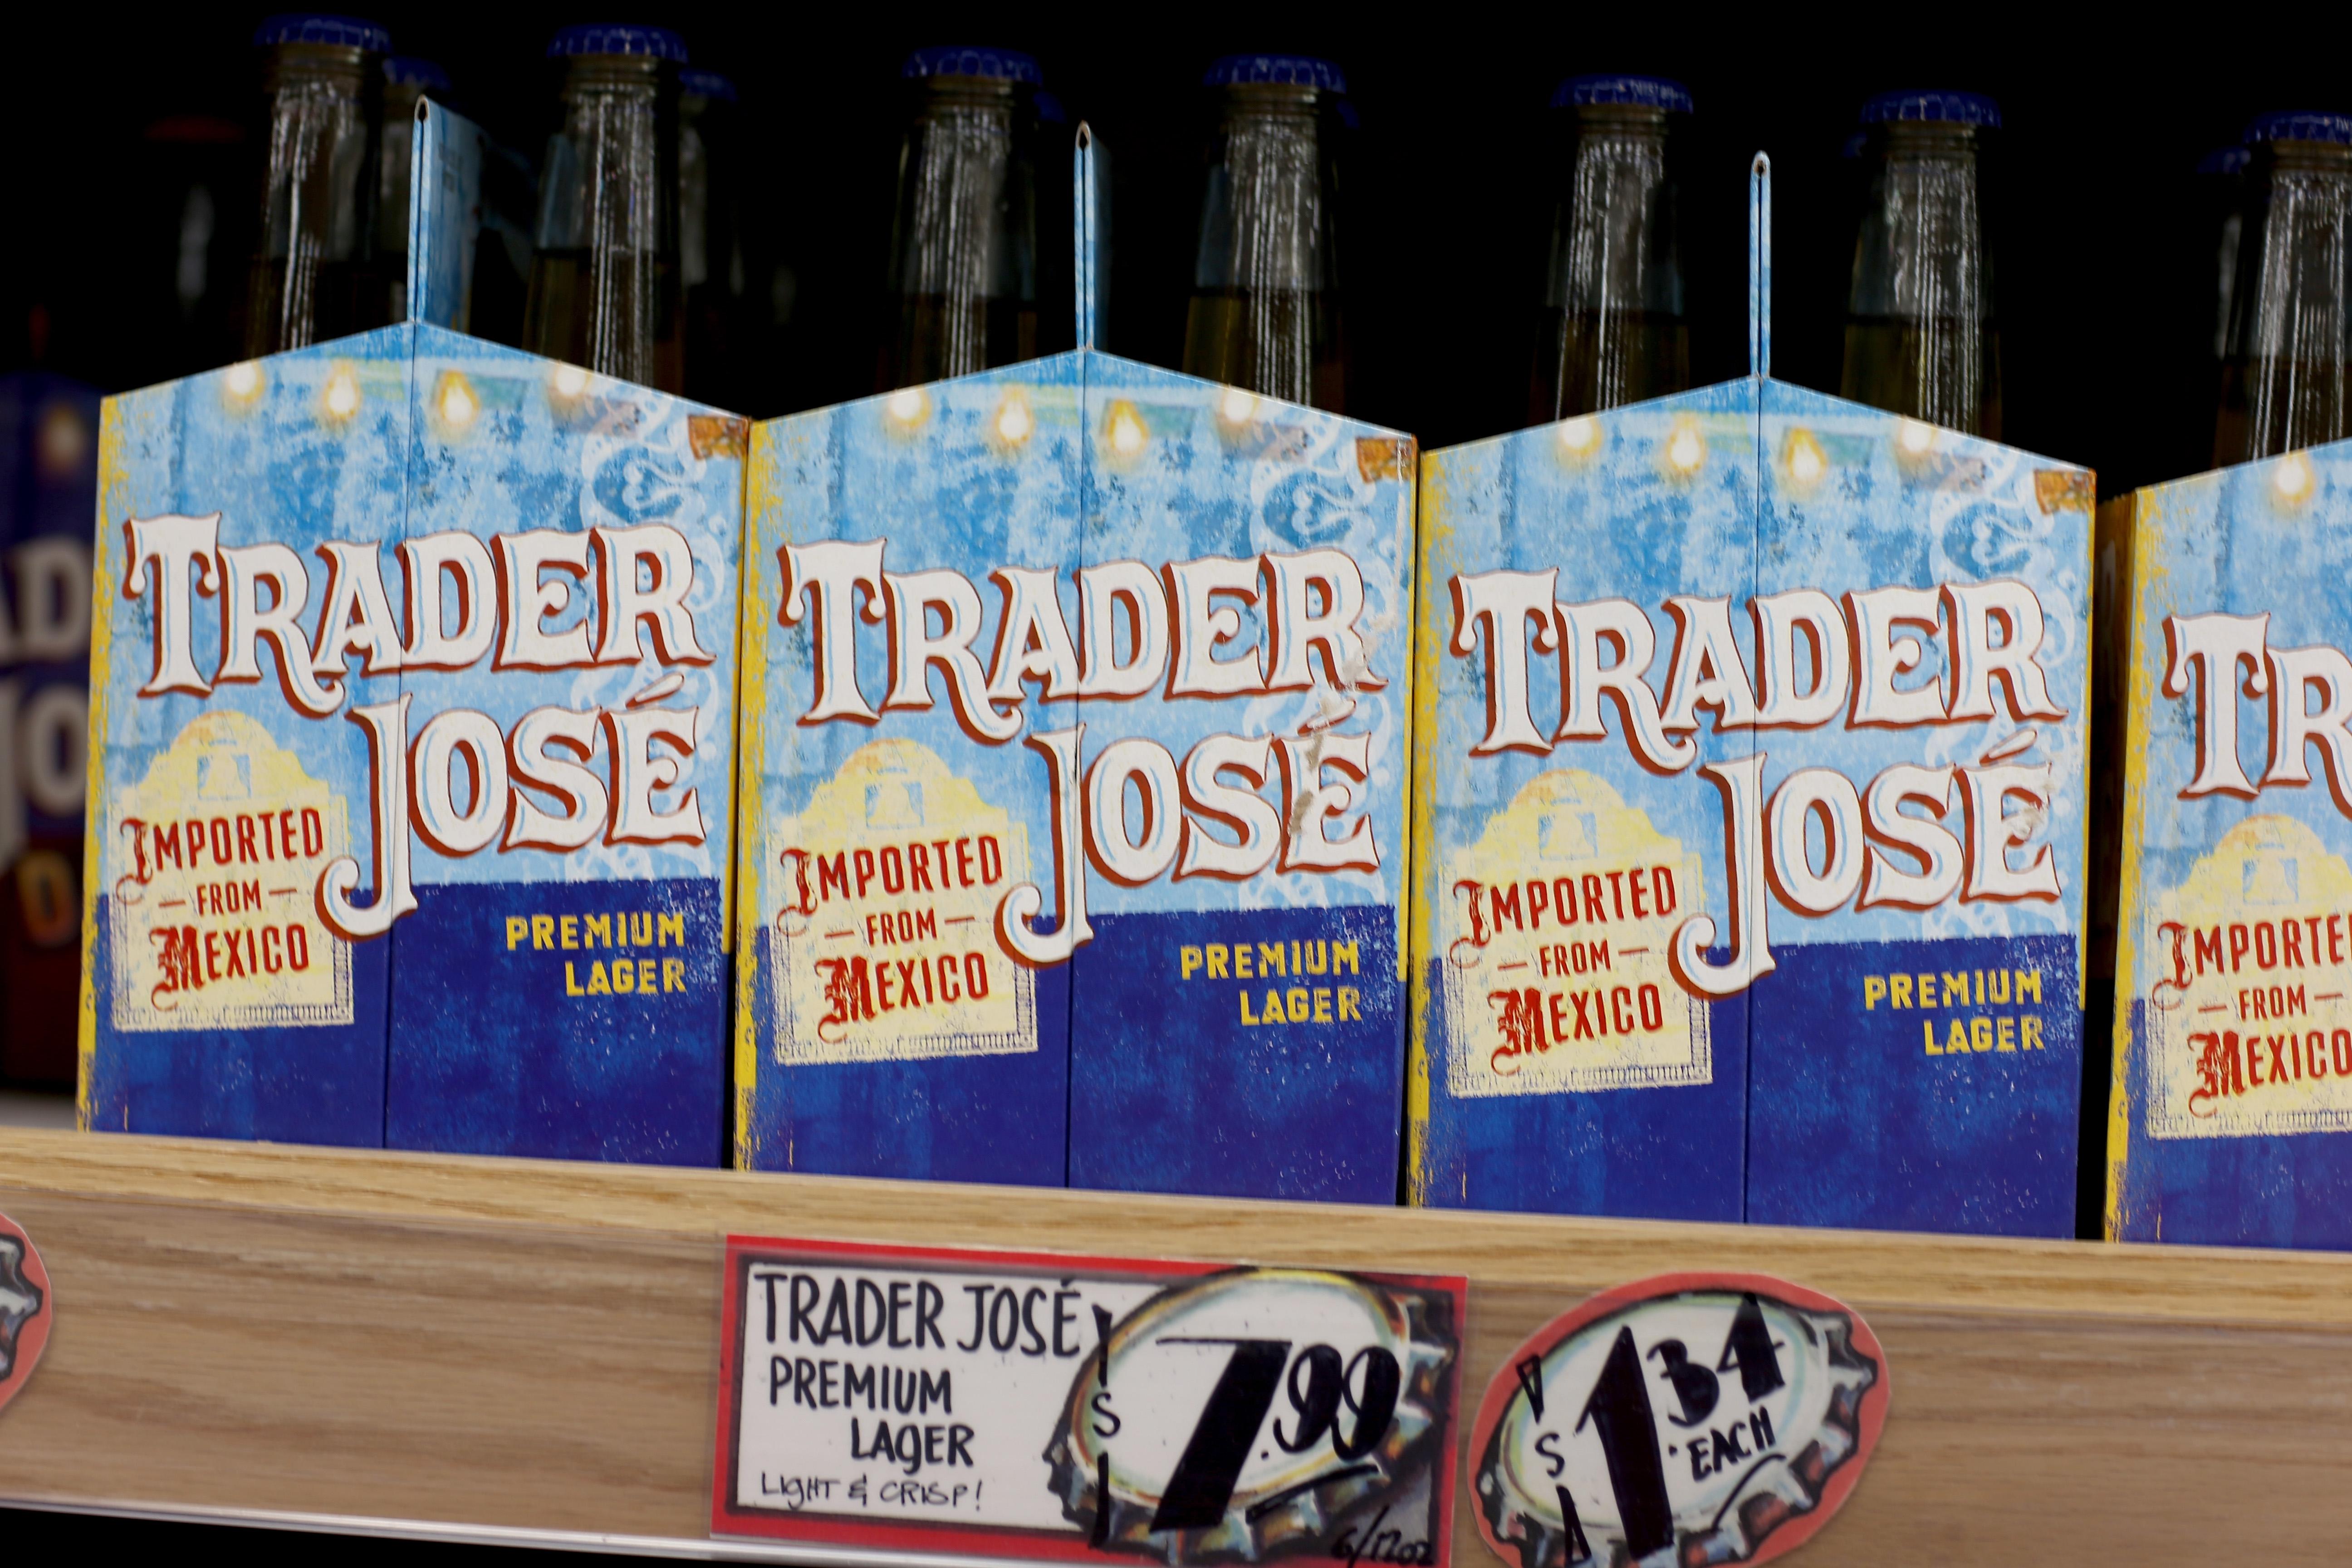 Trader Joe's Says Their Ethnic Food Branding Isn't "Racist", Won't Change a Thing Following Complaints